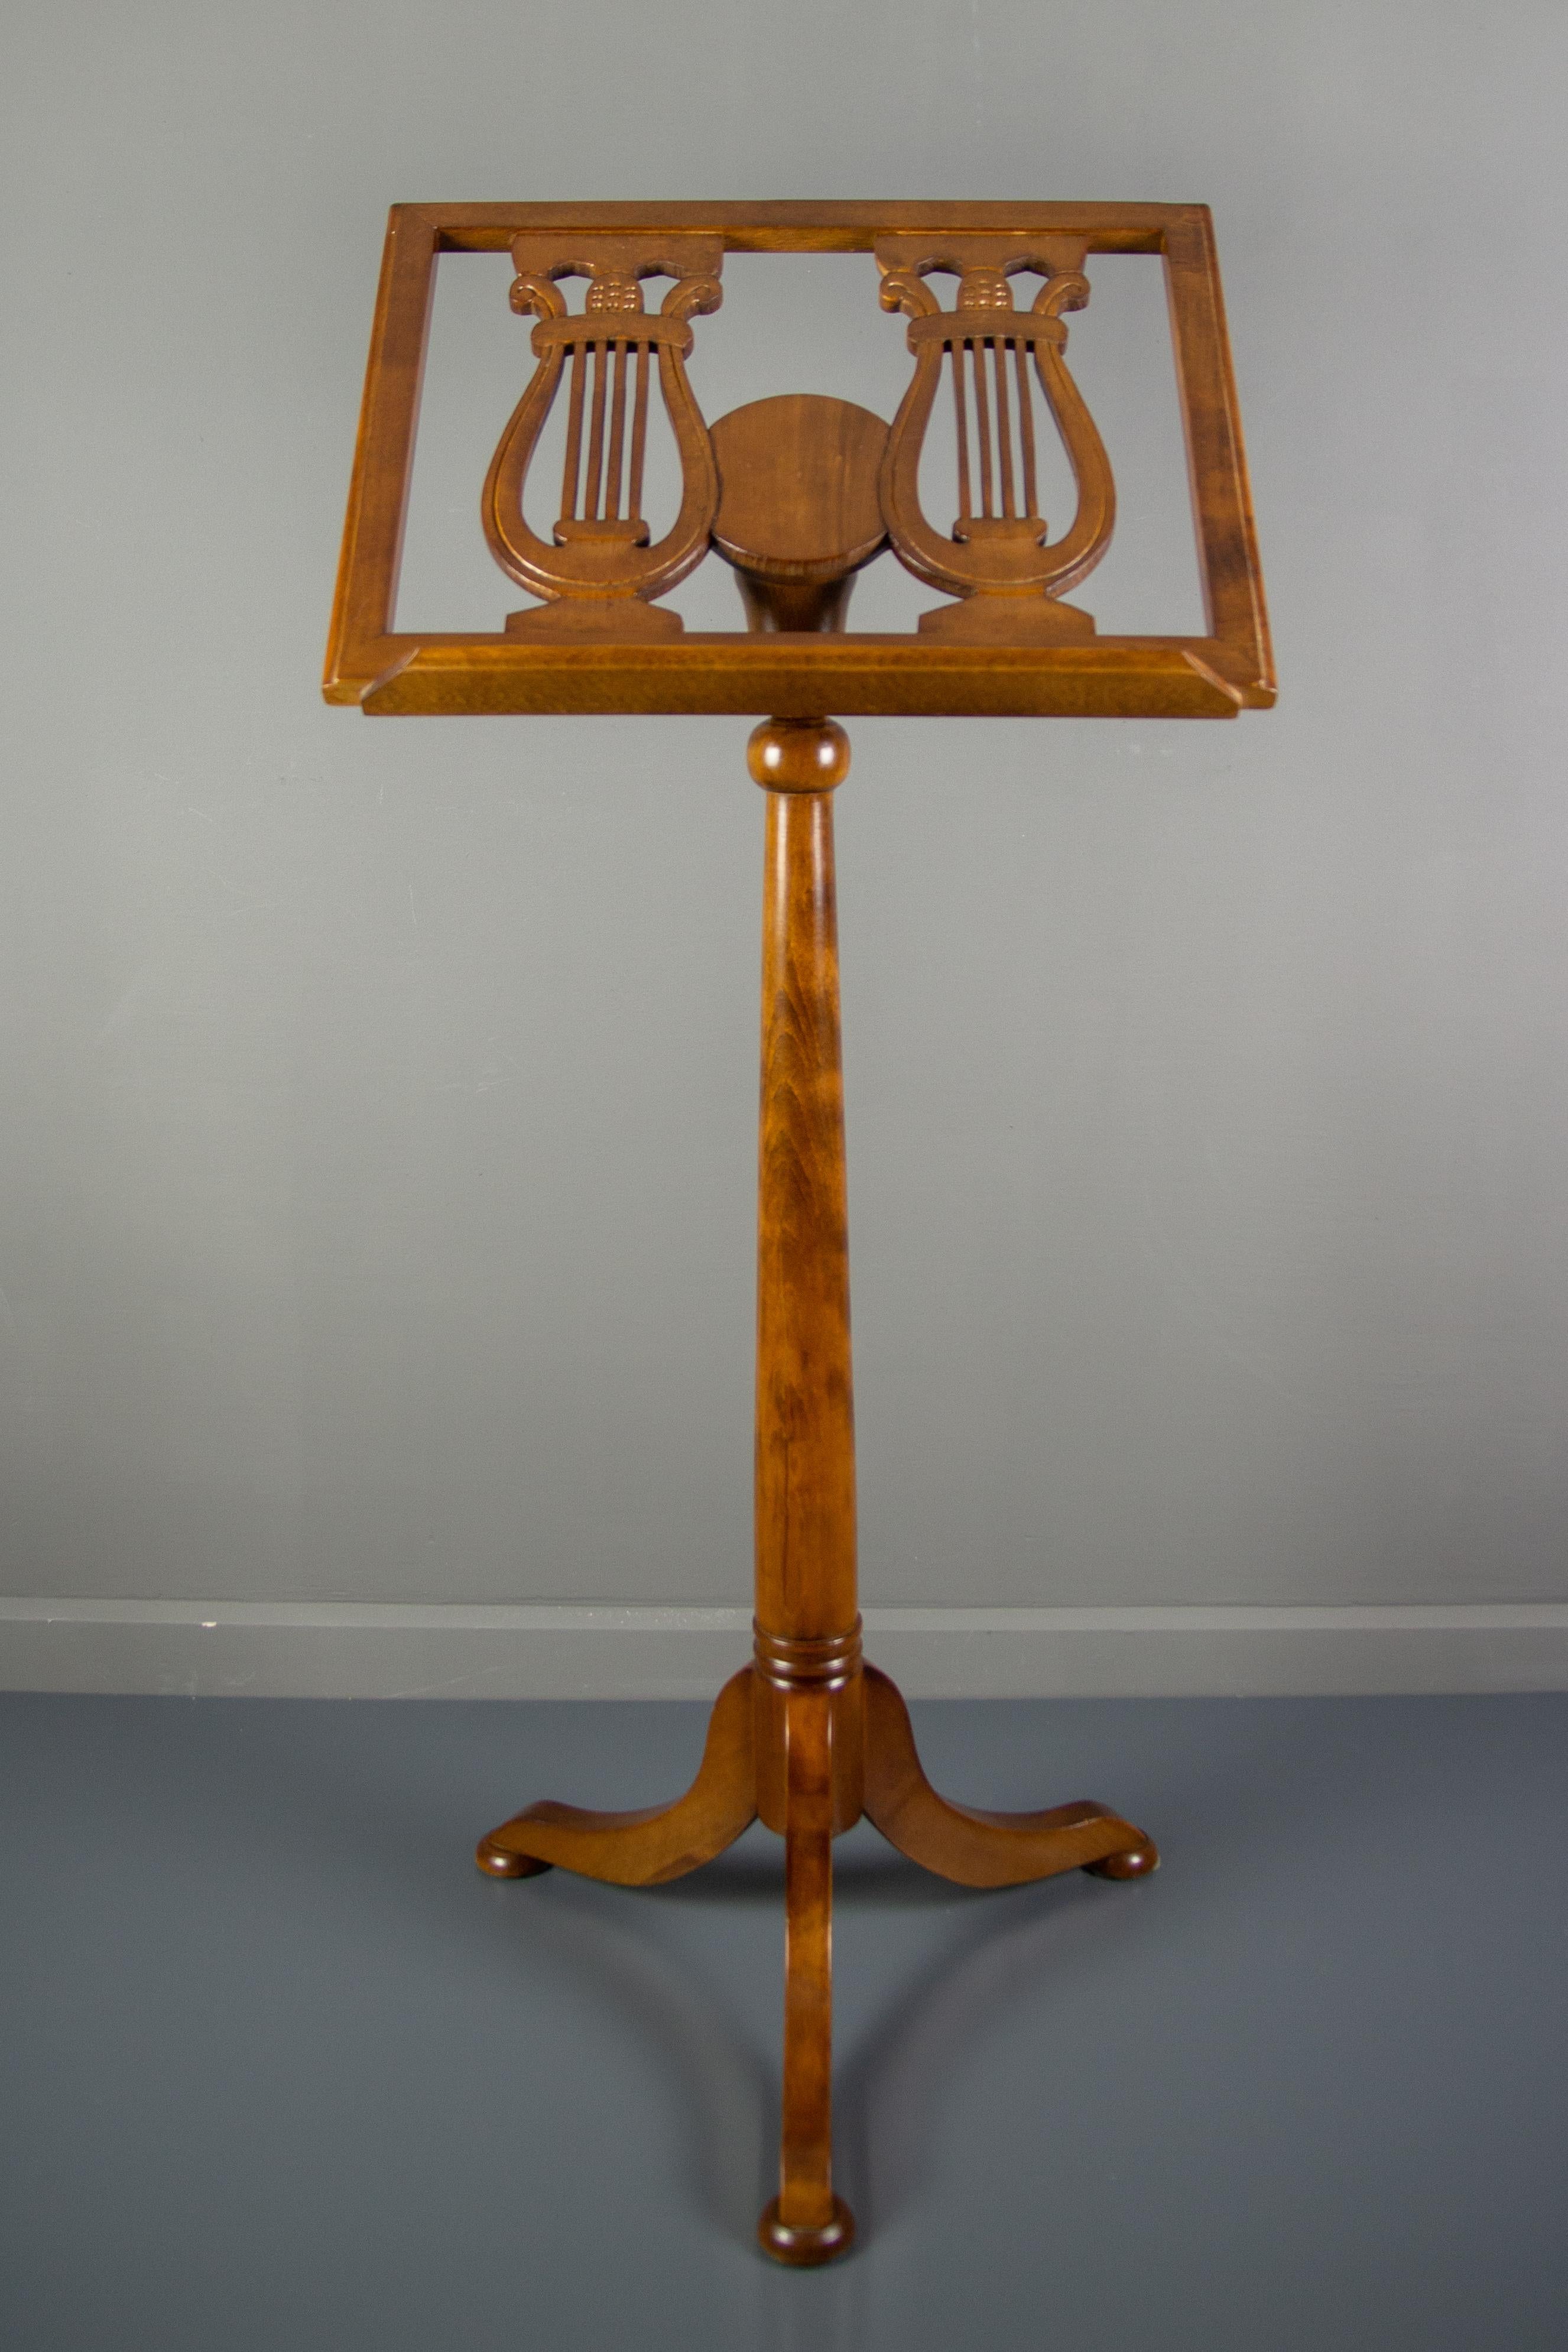 An elegant and beautiful wooden music stand with adjustable height on a tripod base. Nicely decorated with two lyres, it will accommodate sheet music or books, Germany, 1930s-1940s.
Dimensions:
Height, adjusted to the highest position 140 cm /